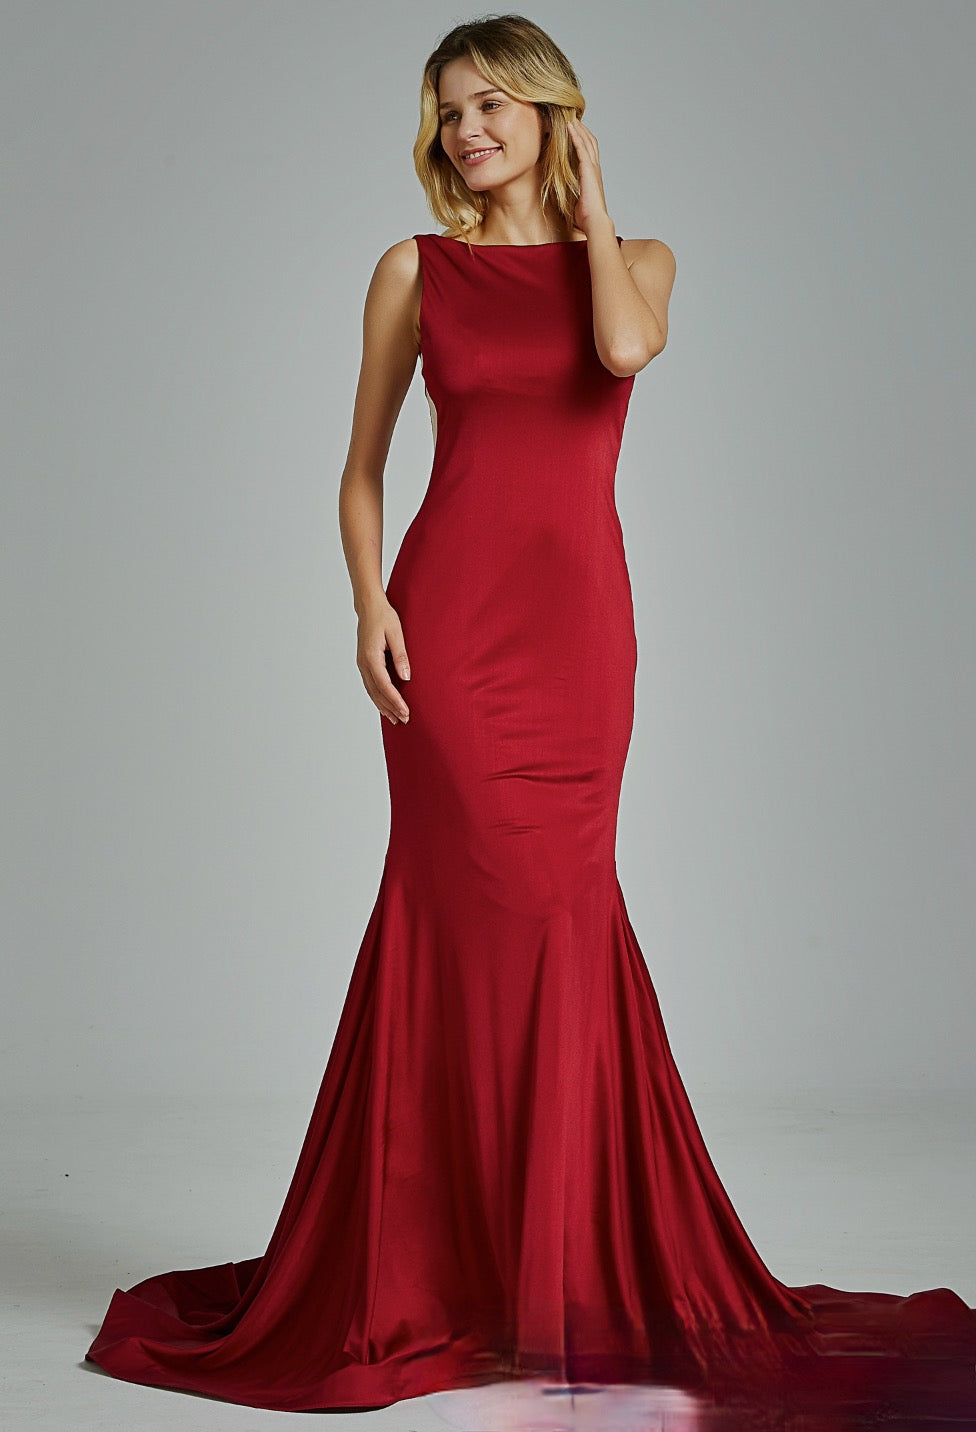 Fitted Bateau Neckline Bridesmaid Dress with Plunging V-Back